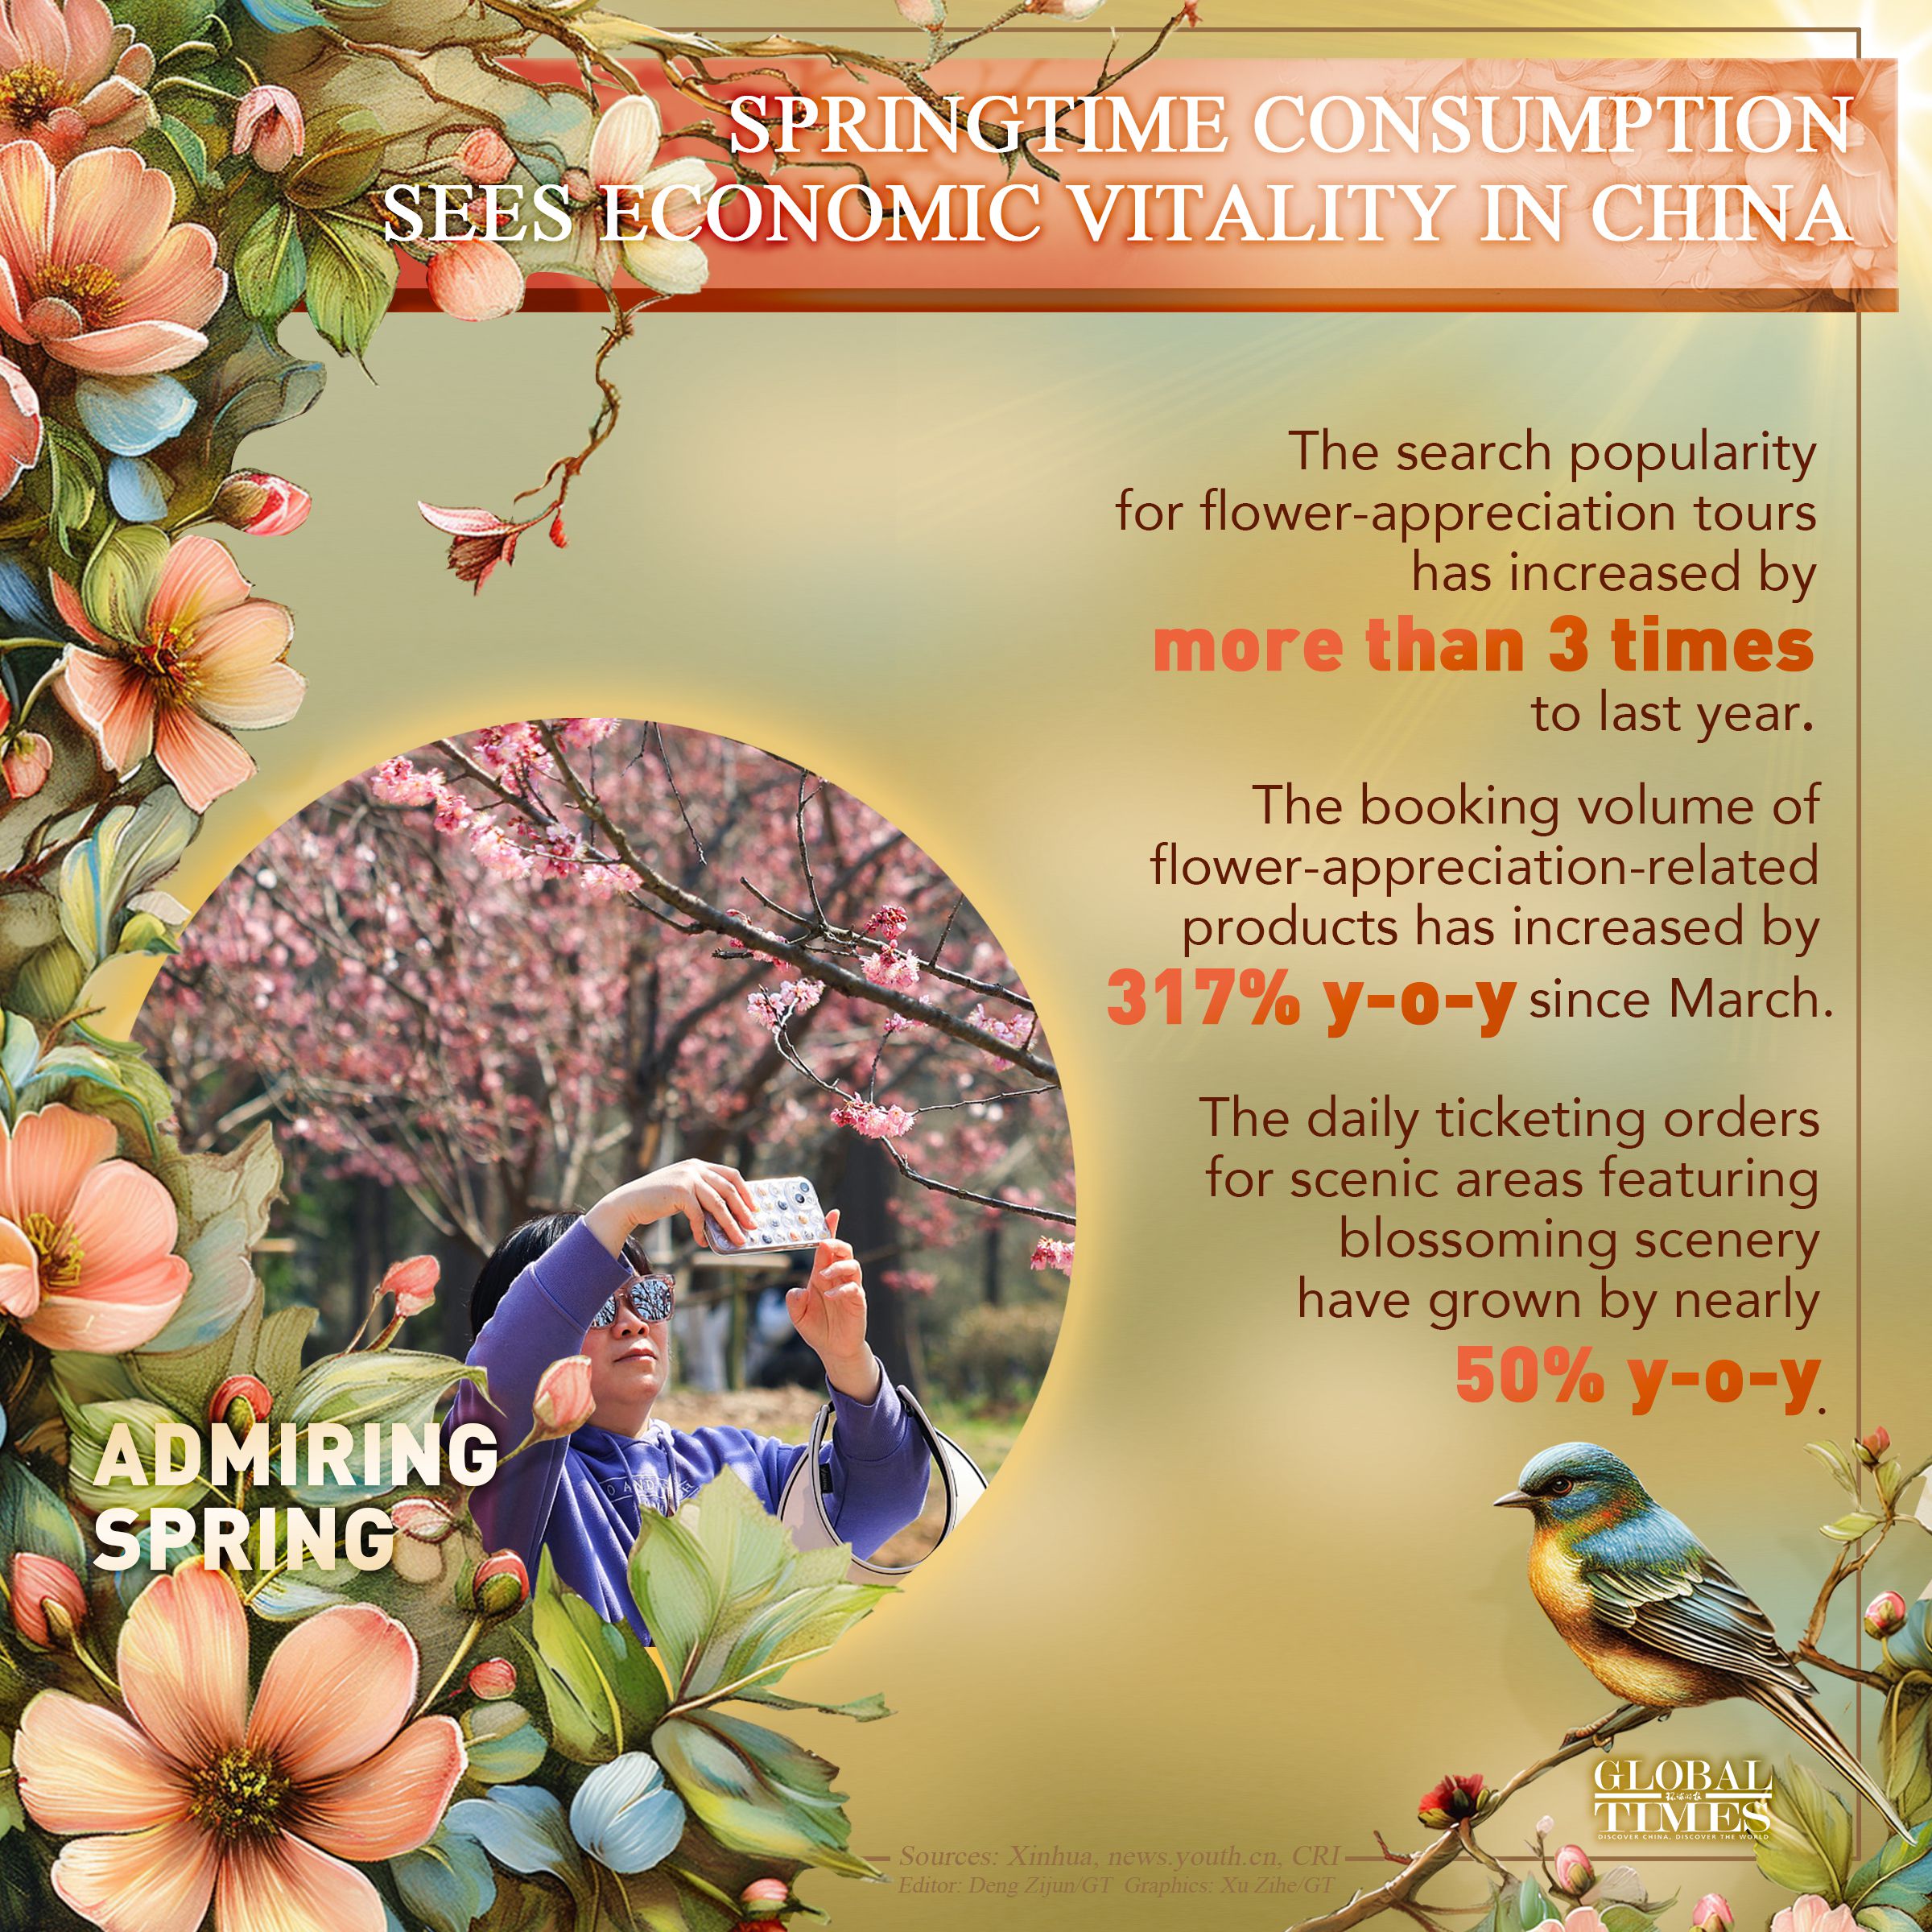 Springtime consumption sees economic vitality in China